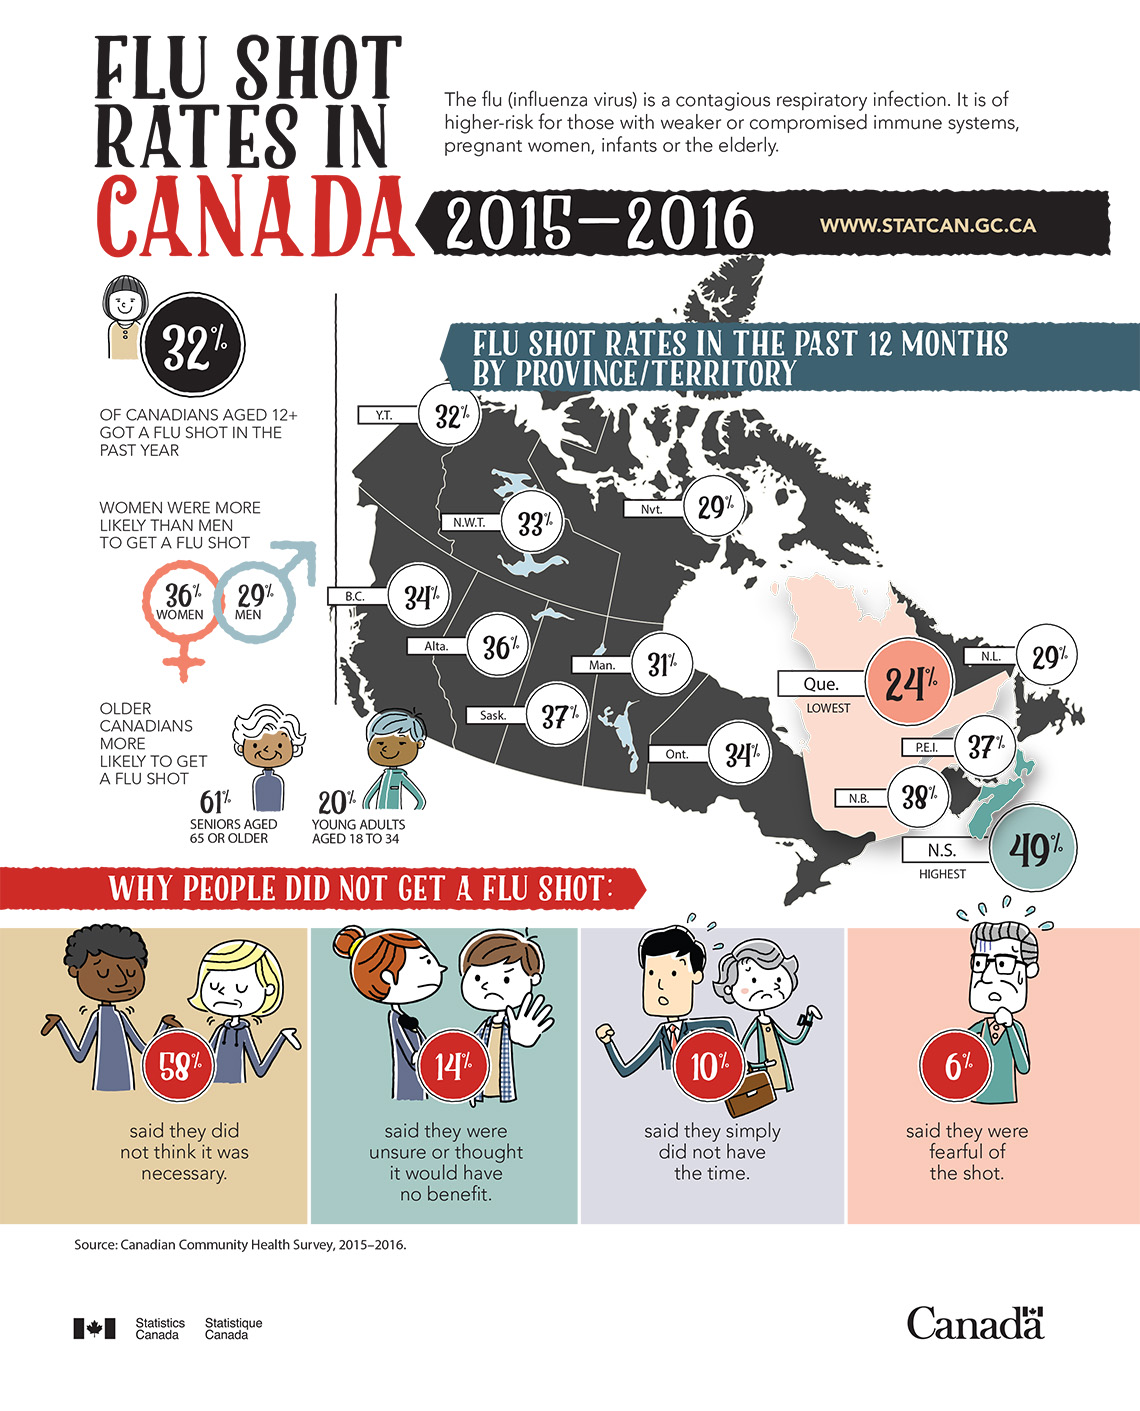 Infographic: Flu shot rates in Canada, 2015-2016